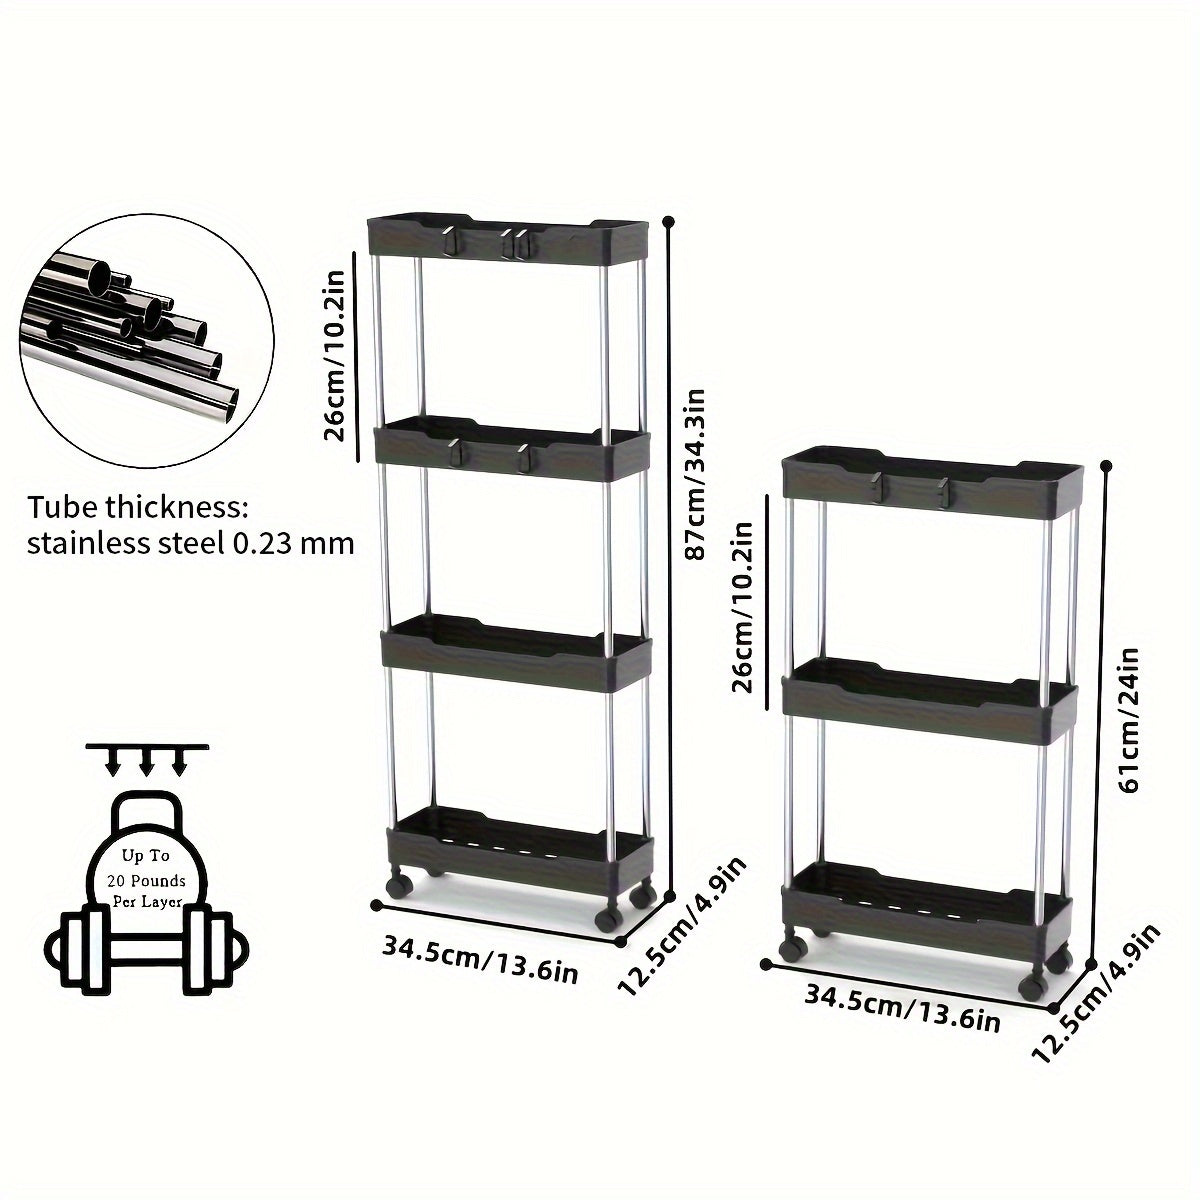 1pc 3/4 Layers Rolling Storage Cart, Bathroom Storage Mobile Shelf, Multifunctional Cart, Tower Shelf For Laundry Room And Other Narrow Spaces